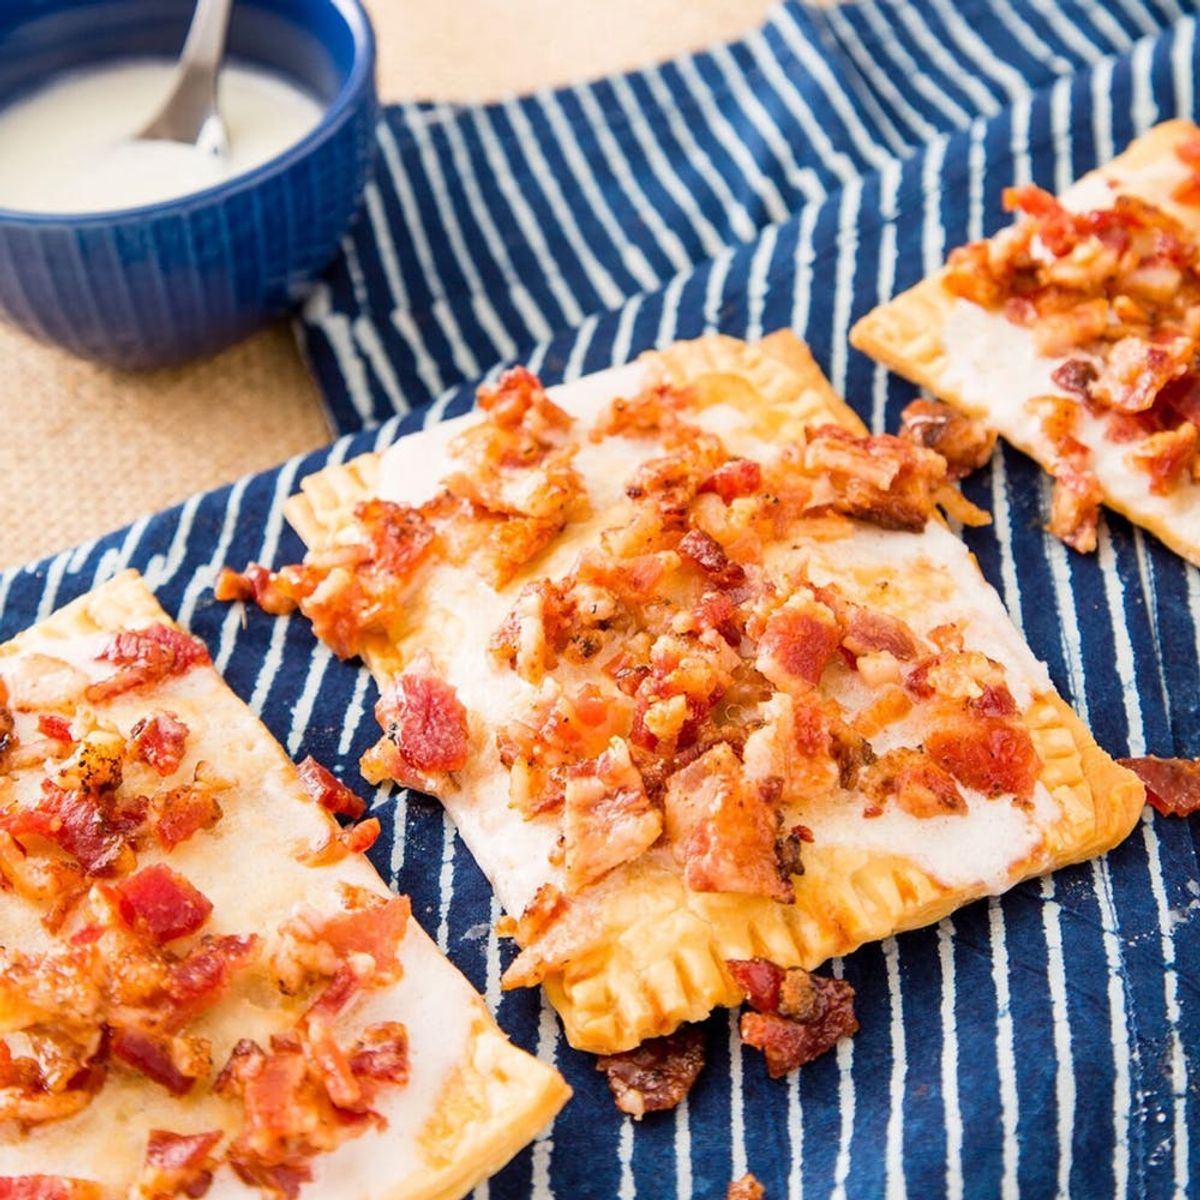 Make These Peanut Butter Bacon Pop-Tarts for Father’s Day